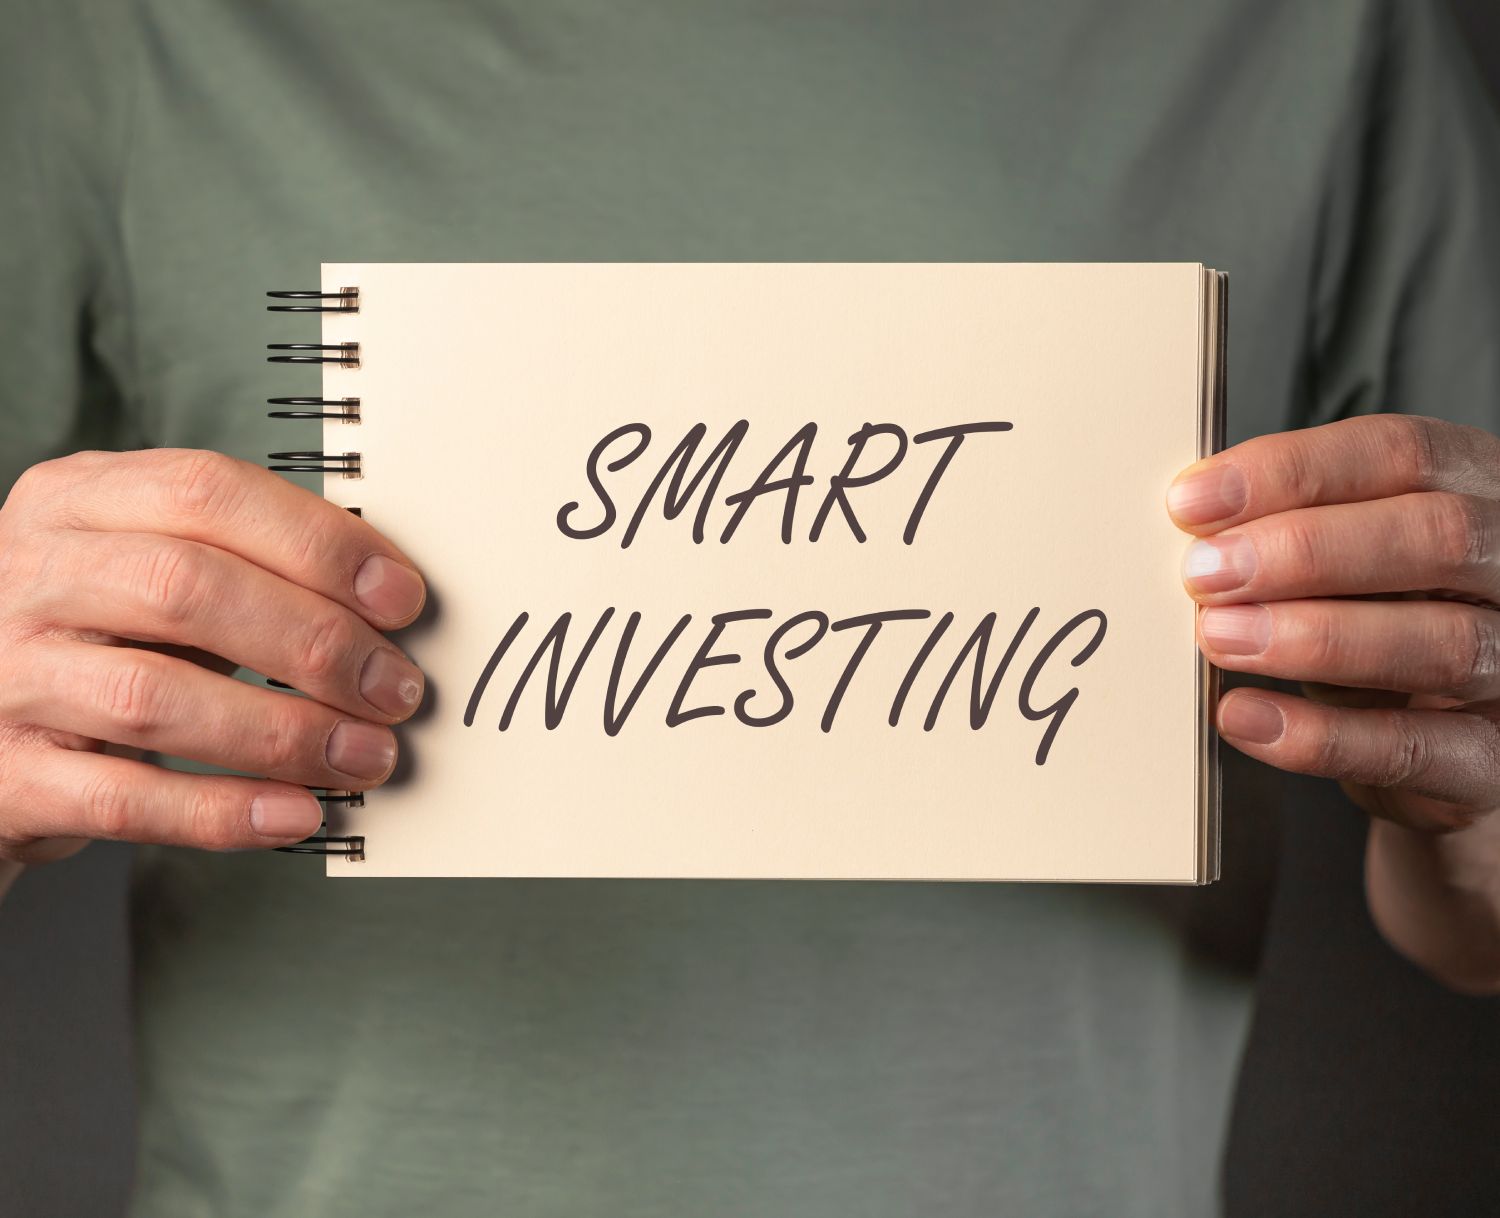 Discover 3 Smart Ways to Invest and Make Money with Precious Metals